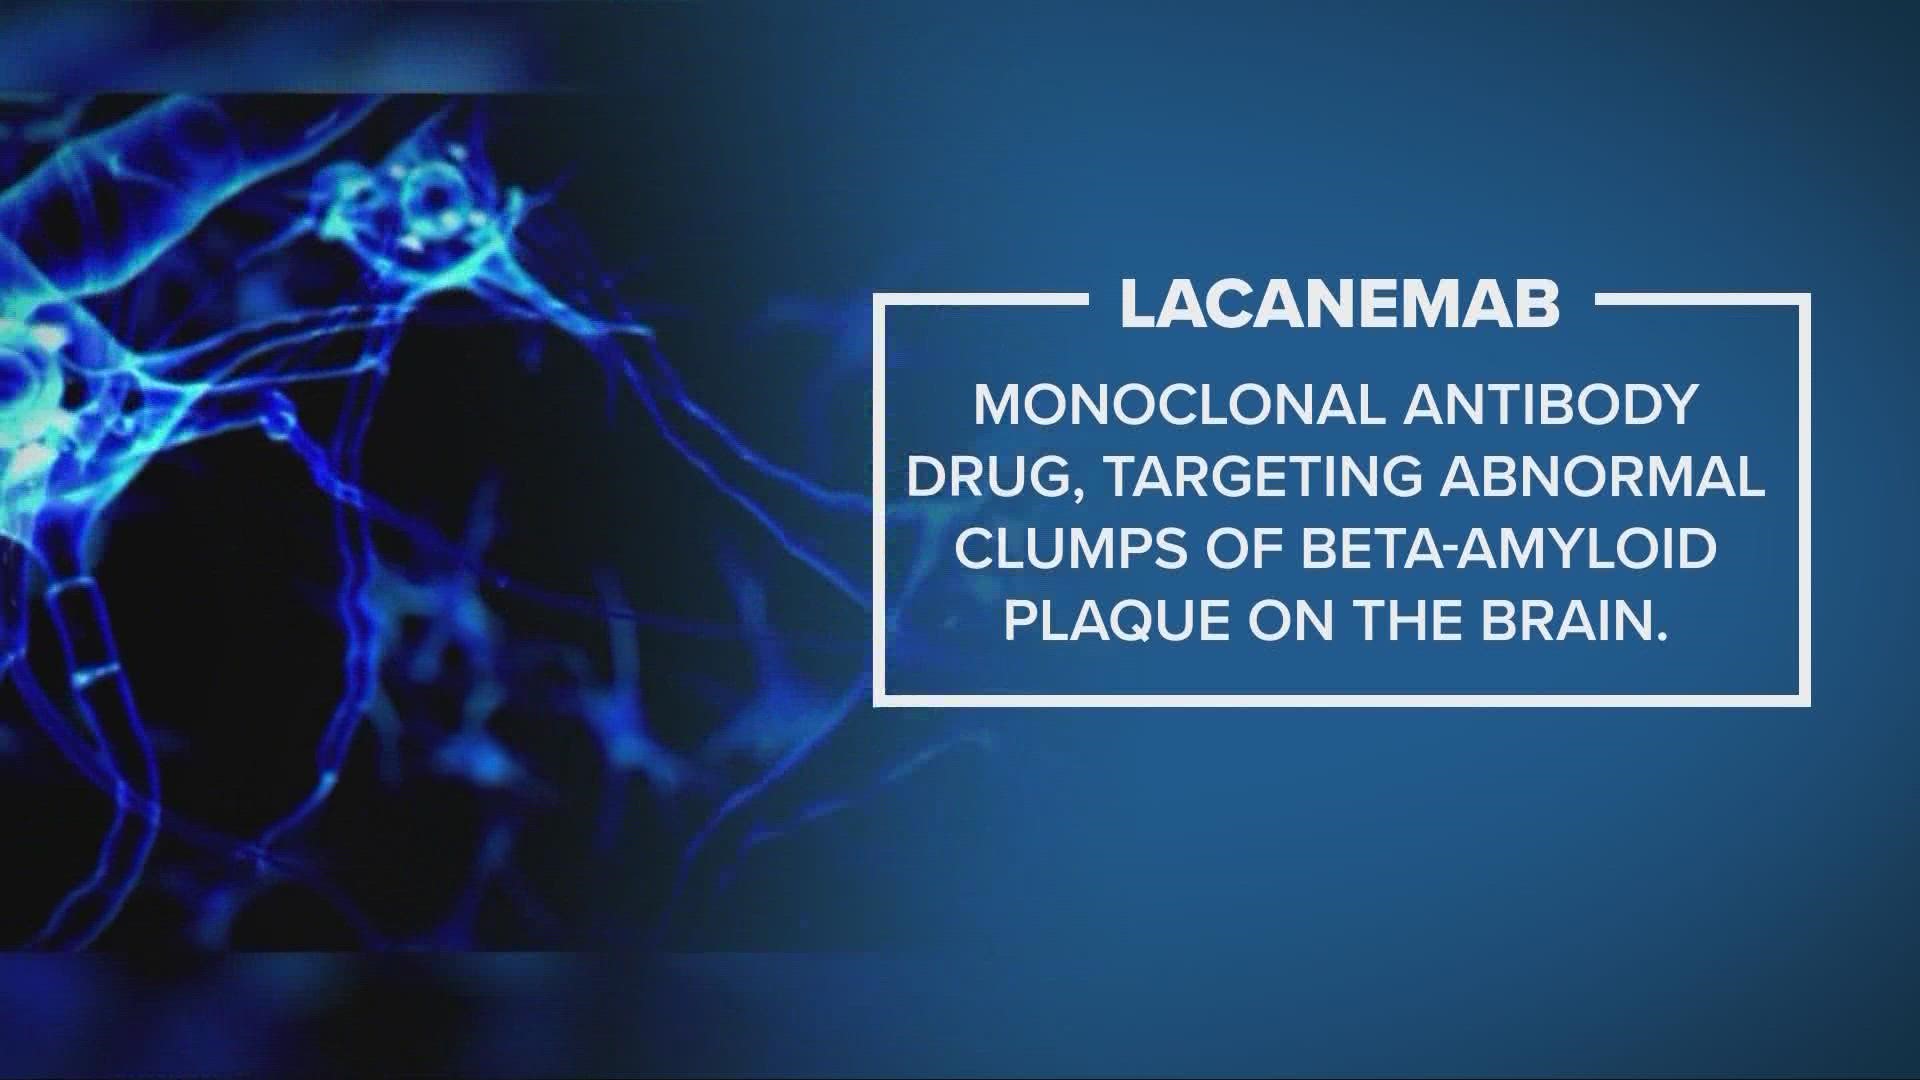 Lecanemab showed it helped slow cognitive decline by 27% but more research needed relating to safety risks.